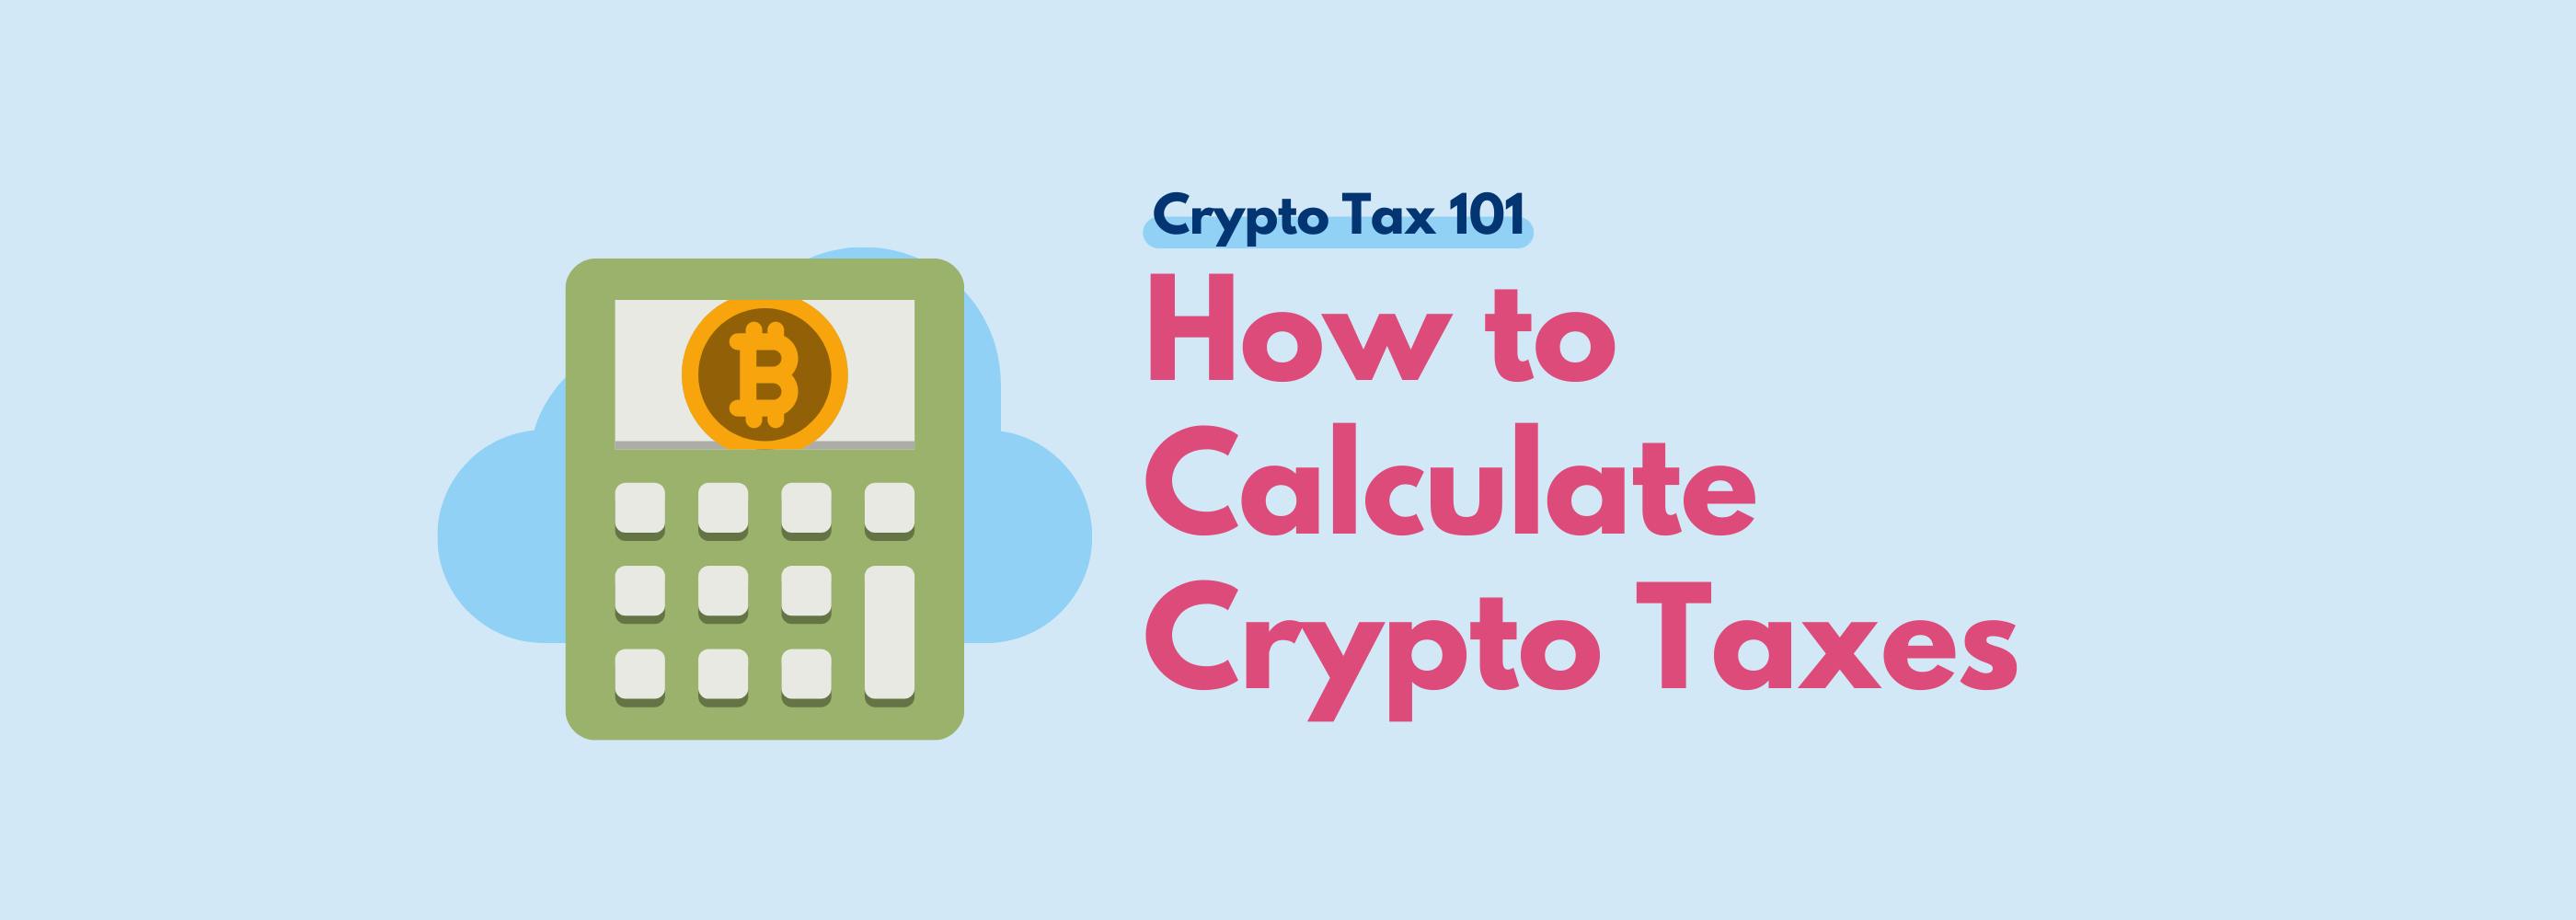 How to Calculate Crypto Taxes